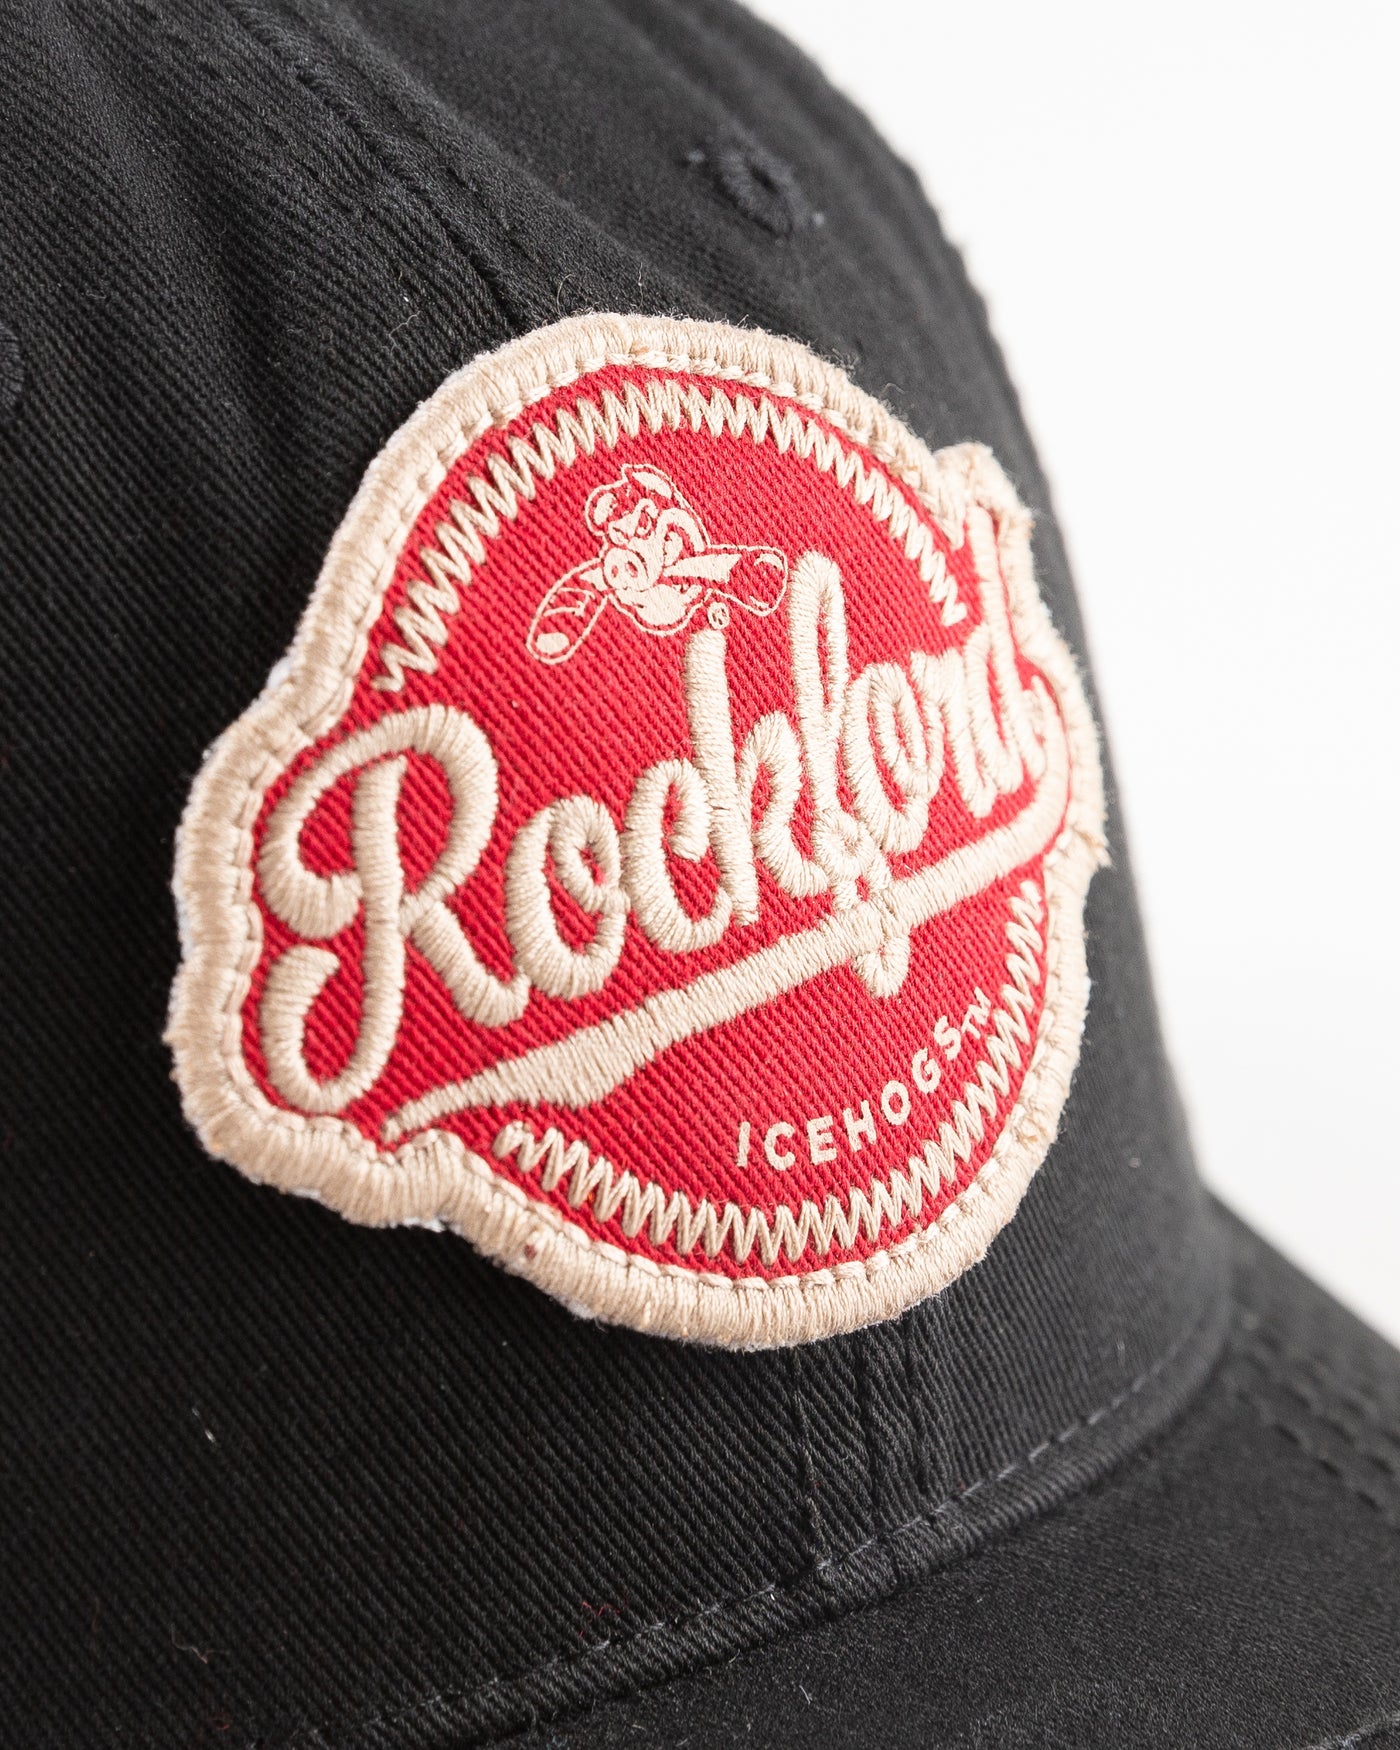 black Rockford IceHogs cap with embroidered red patch on front - detail lay flat